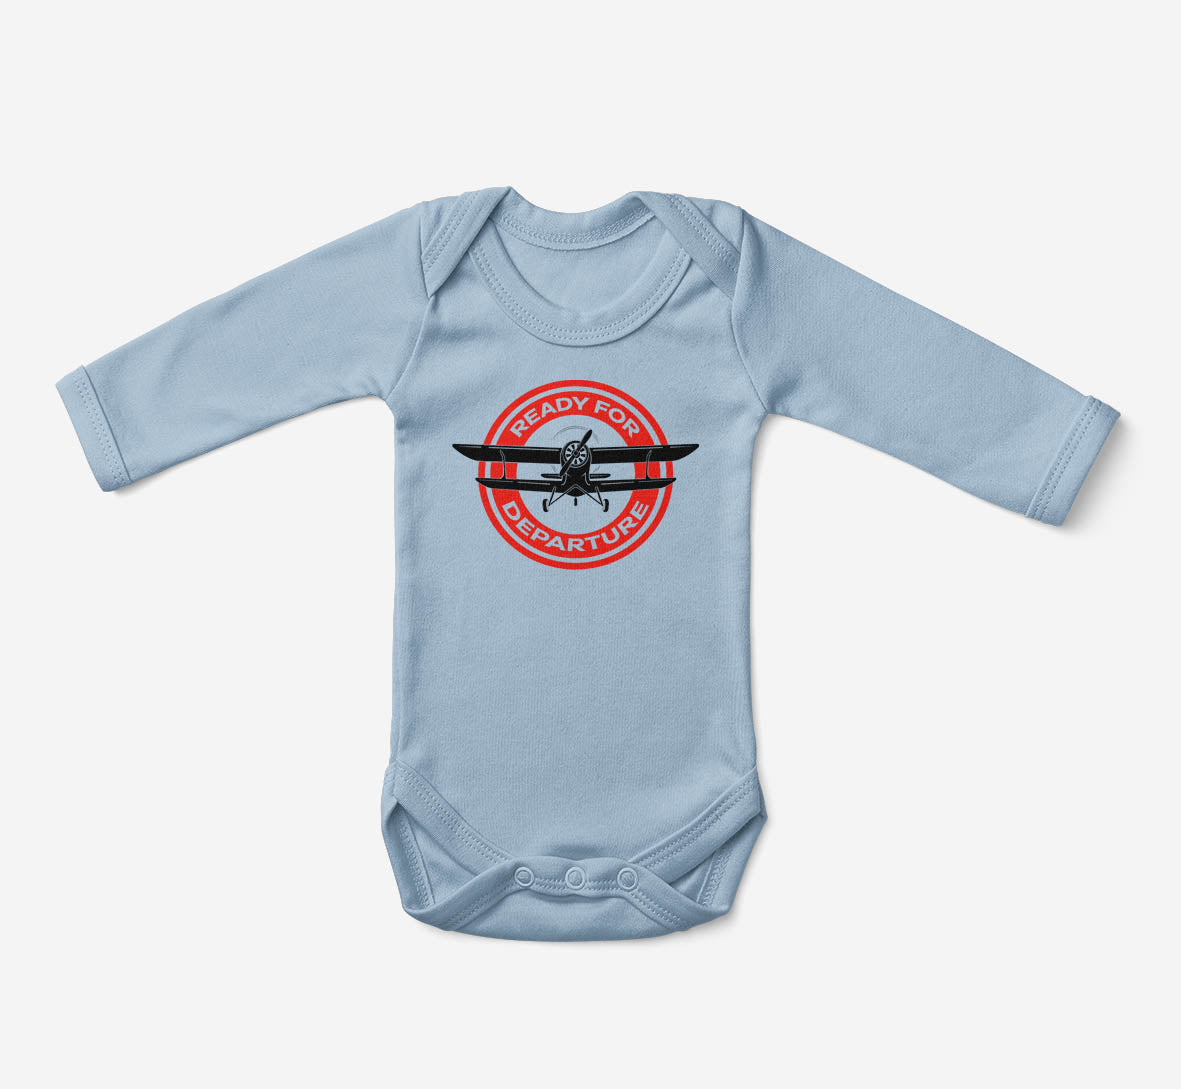 Ready for Departure Designed Baby Bodysuits